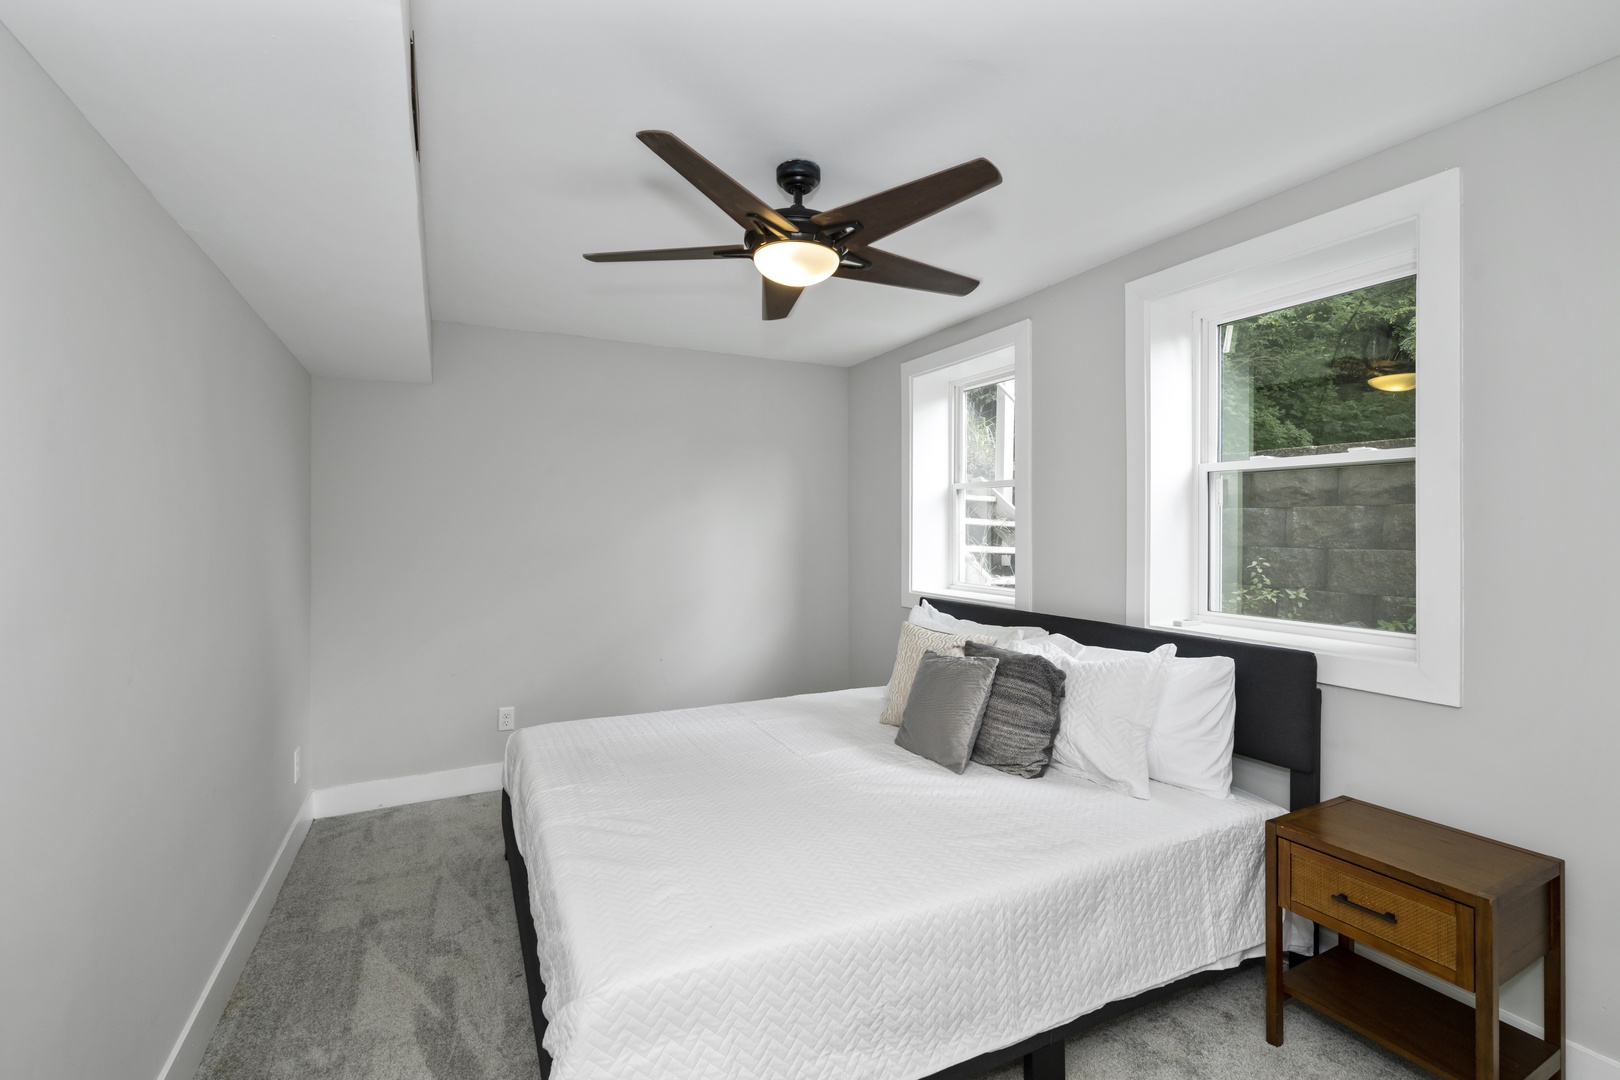 The lower-level king bedroom offers a ceiling fan & lots of privacy